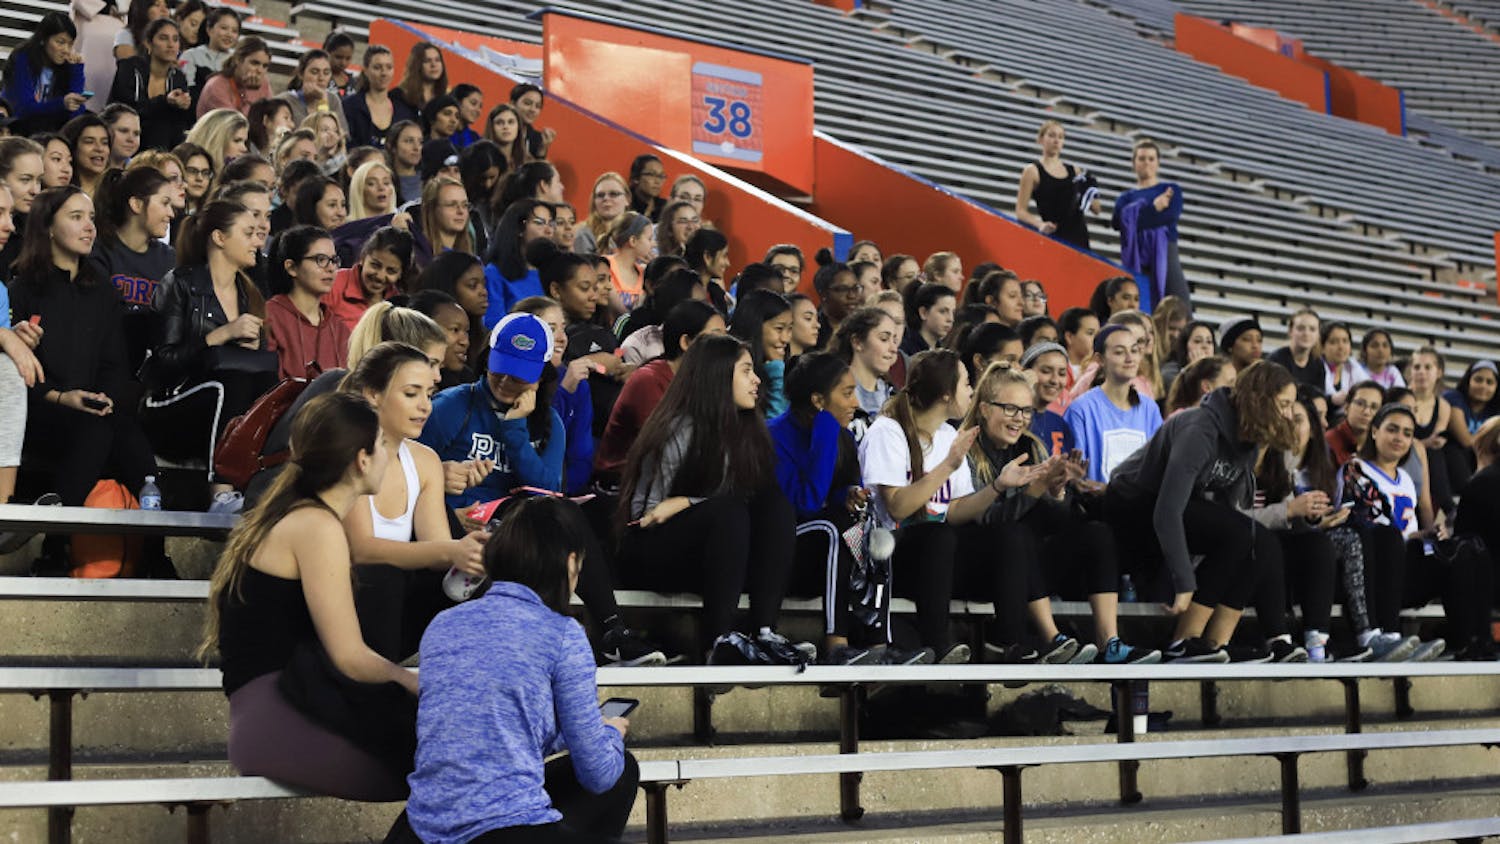 Students waited Friday evening at the Ben Hill Griffin Stadium for PINK campus representatives to announce raffle winners. One hundred sports bras were given away.